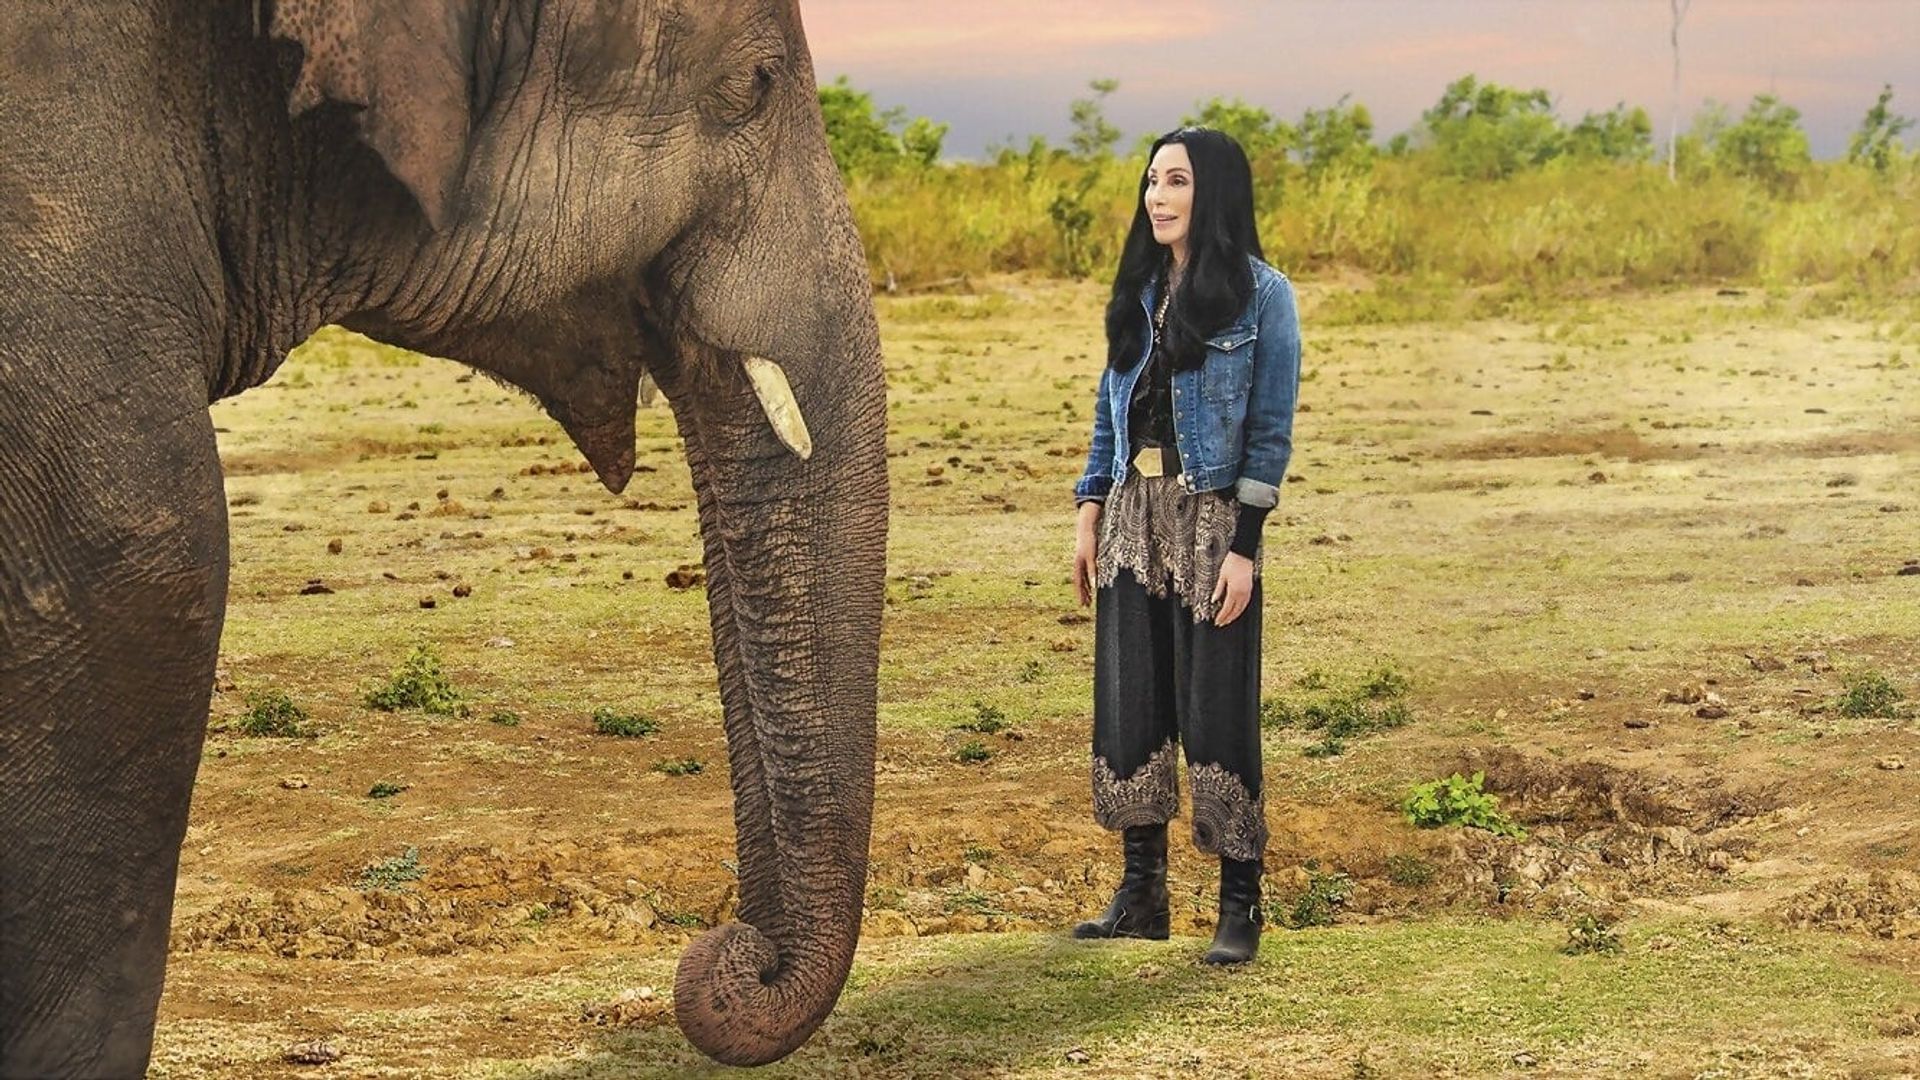 Cher and the Loneliest Elephant background